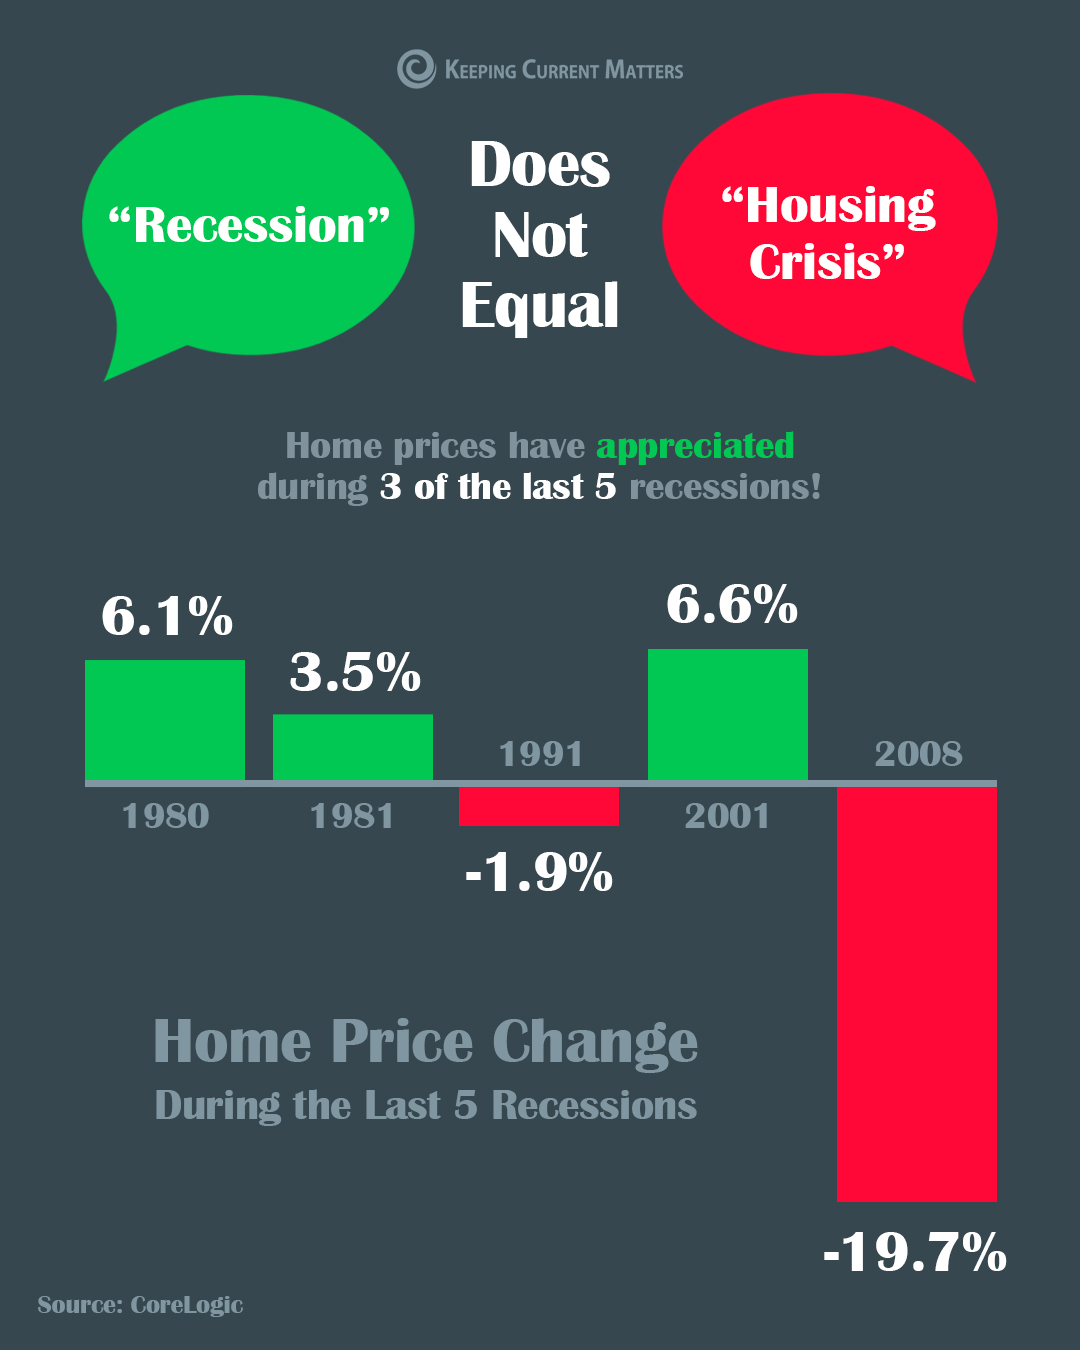 A Recession Does Not Equal a Housing Crisis [INFOGRAPHIC] | Keeping Current Matters